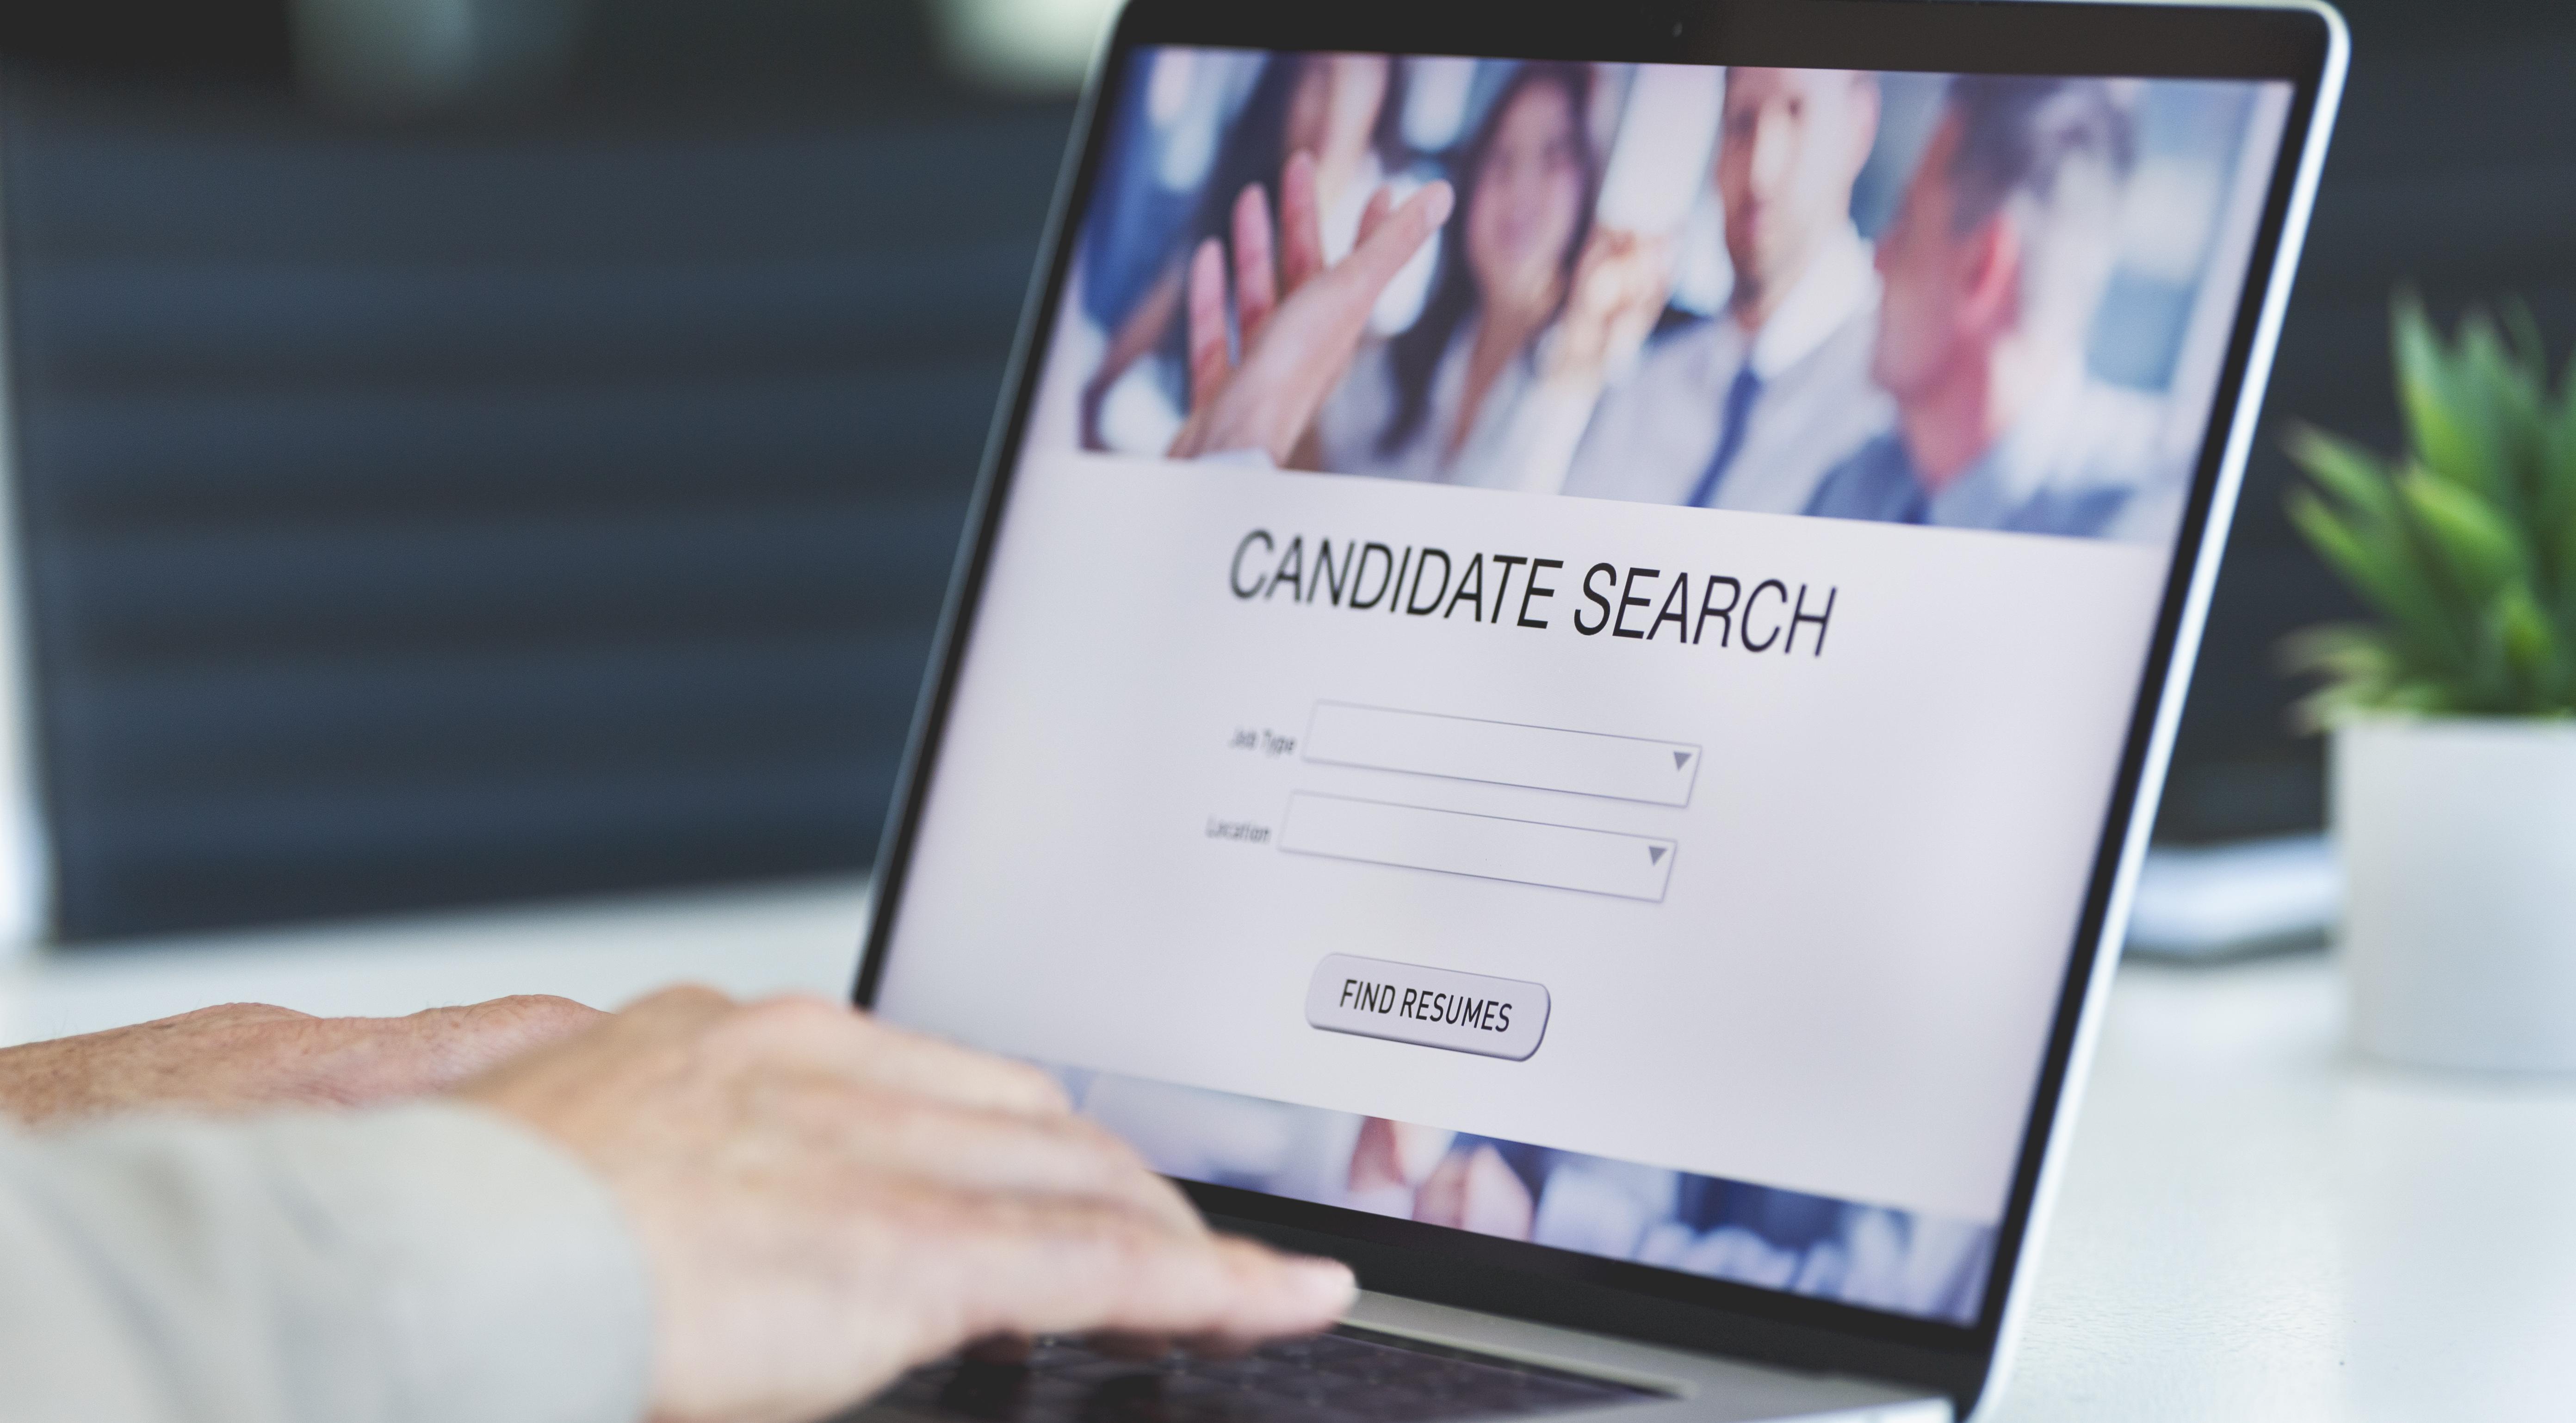 website for candidate search.